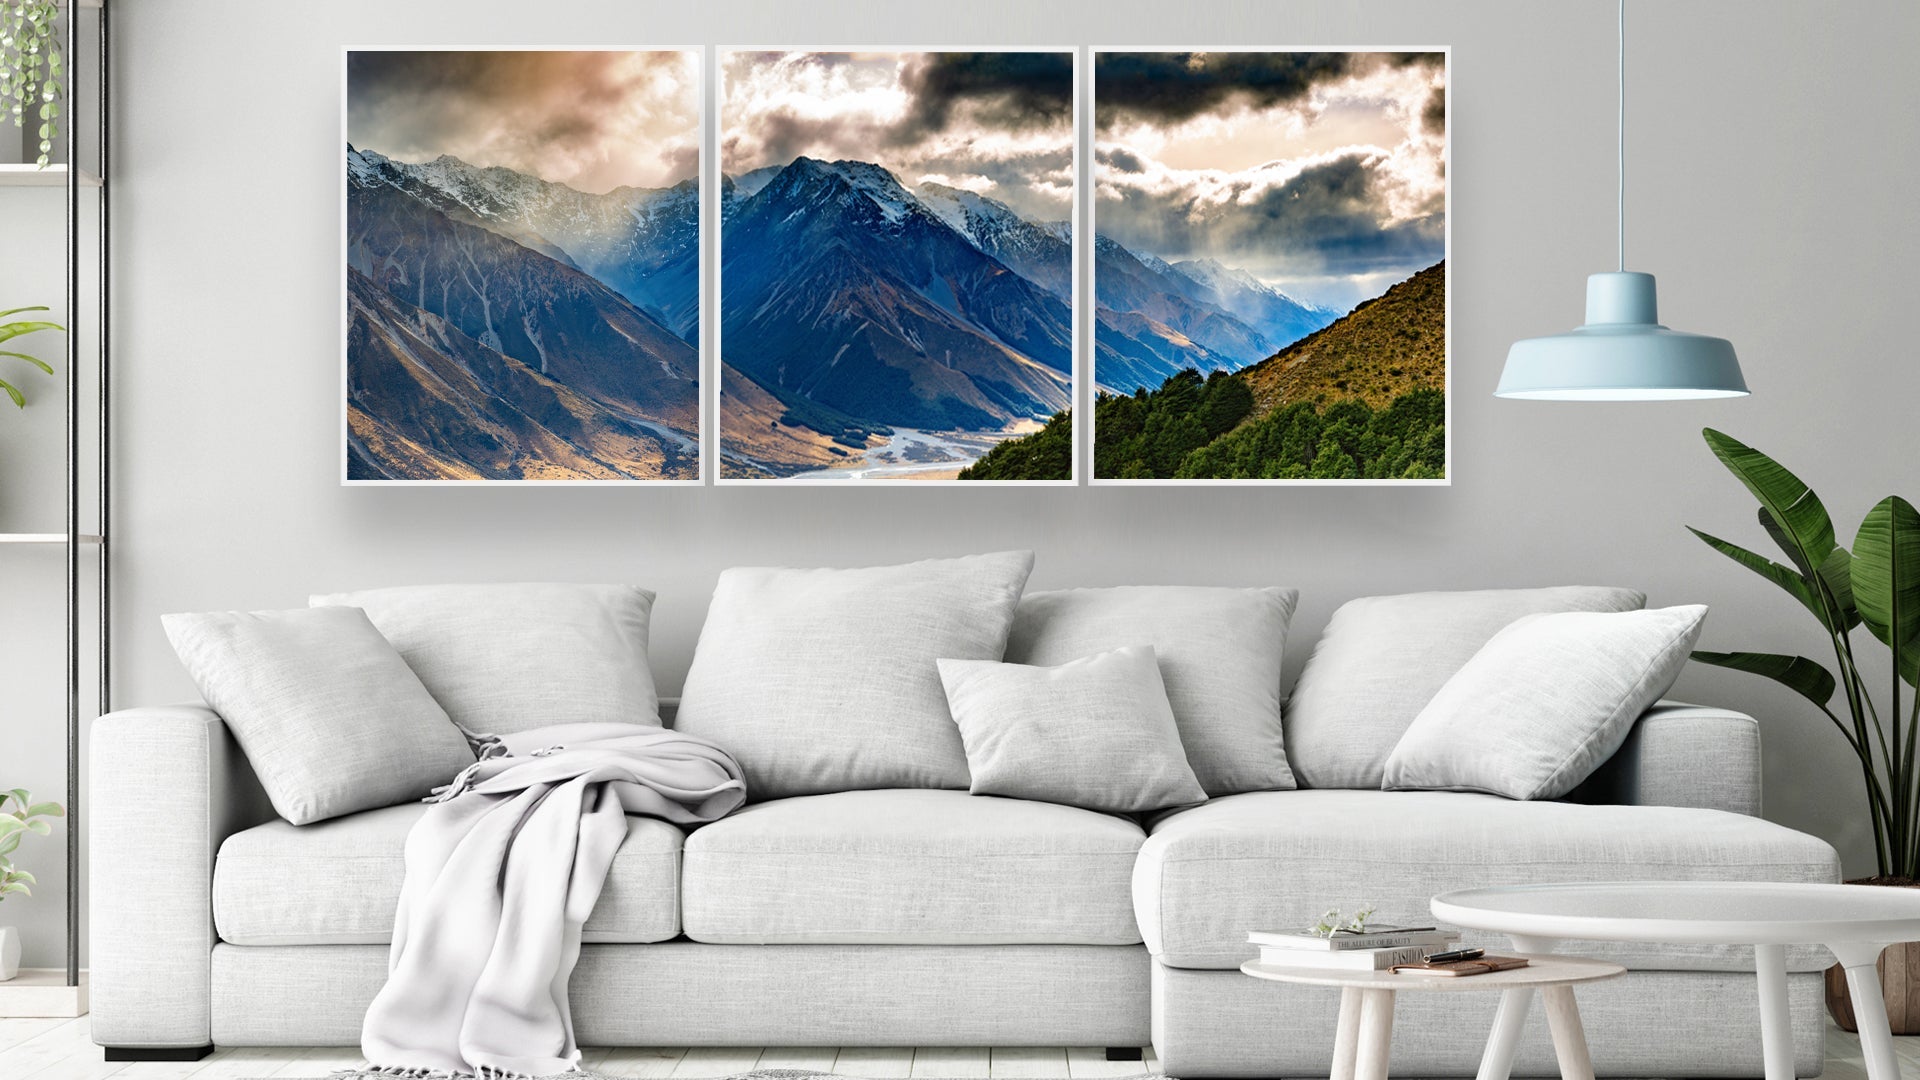 The Dobson River Valley Southern Alps New Zealand wall print